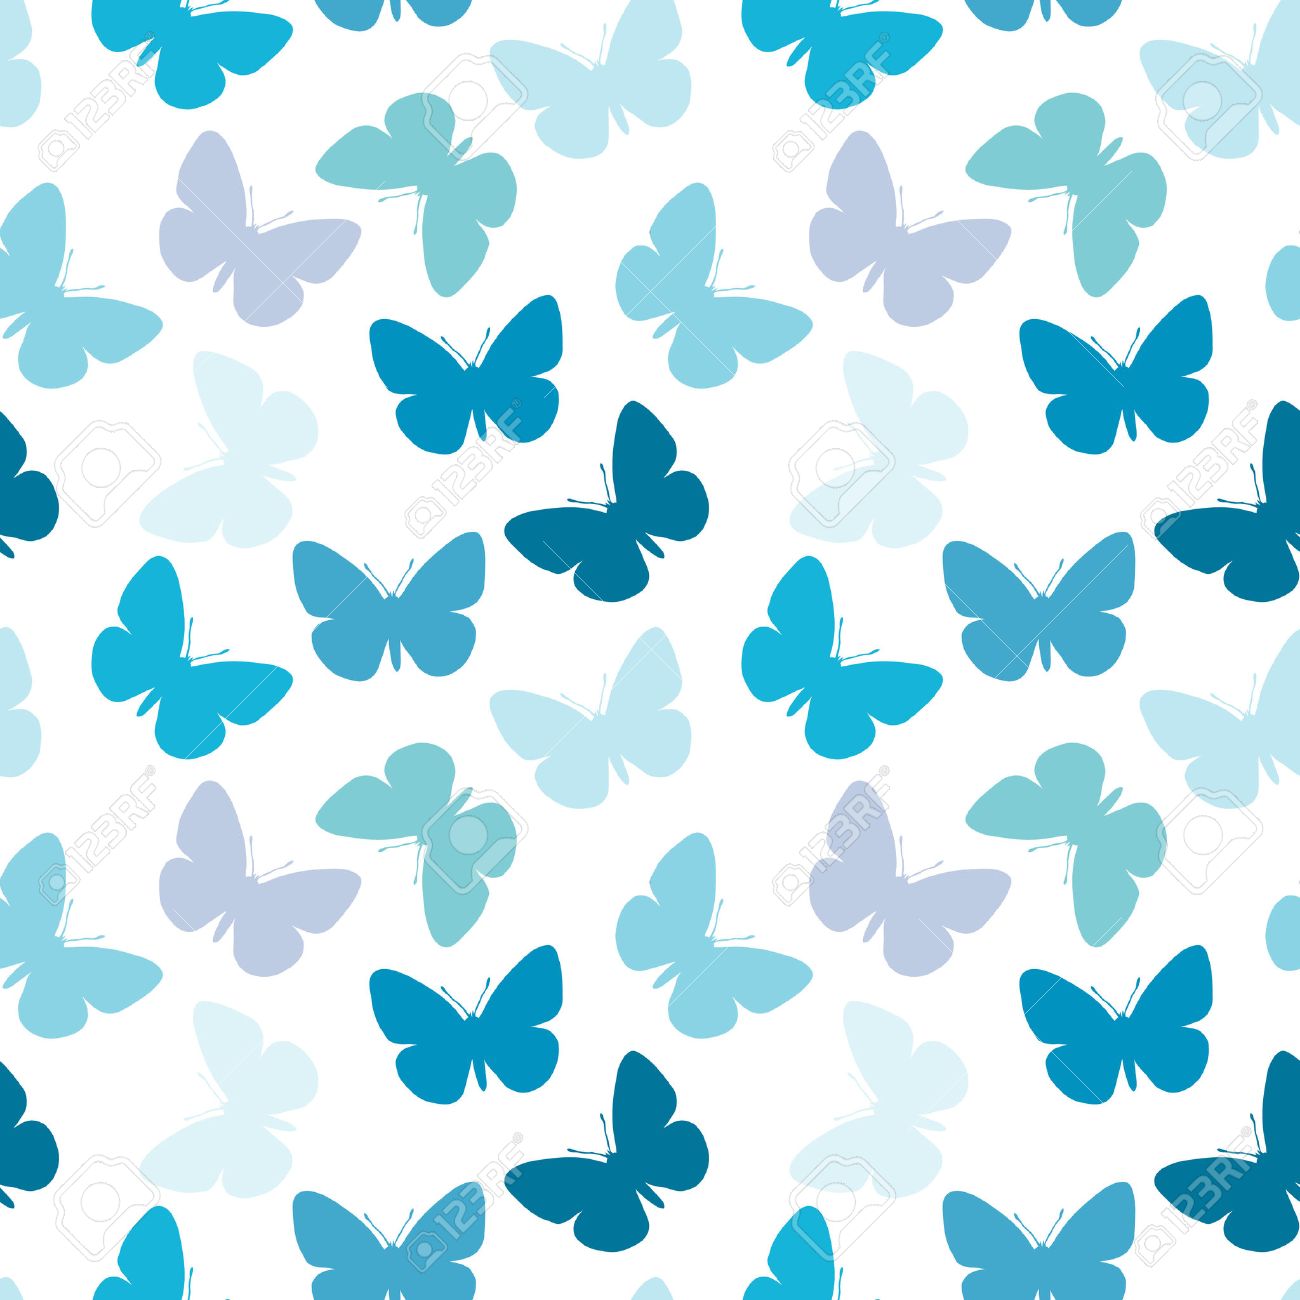 Seamless Blue Butterfly Wallpaper Royalty Free SVG Cliparts